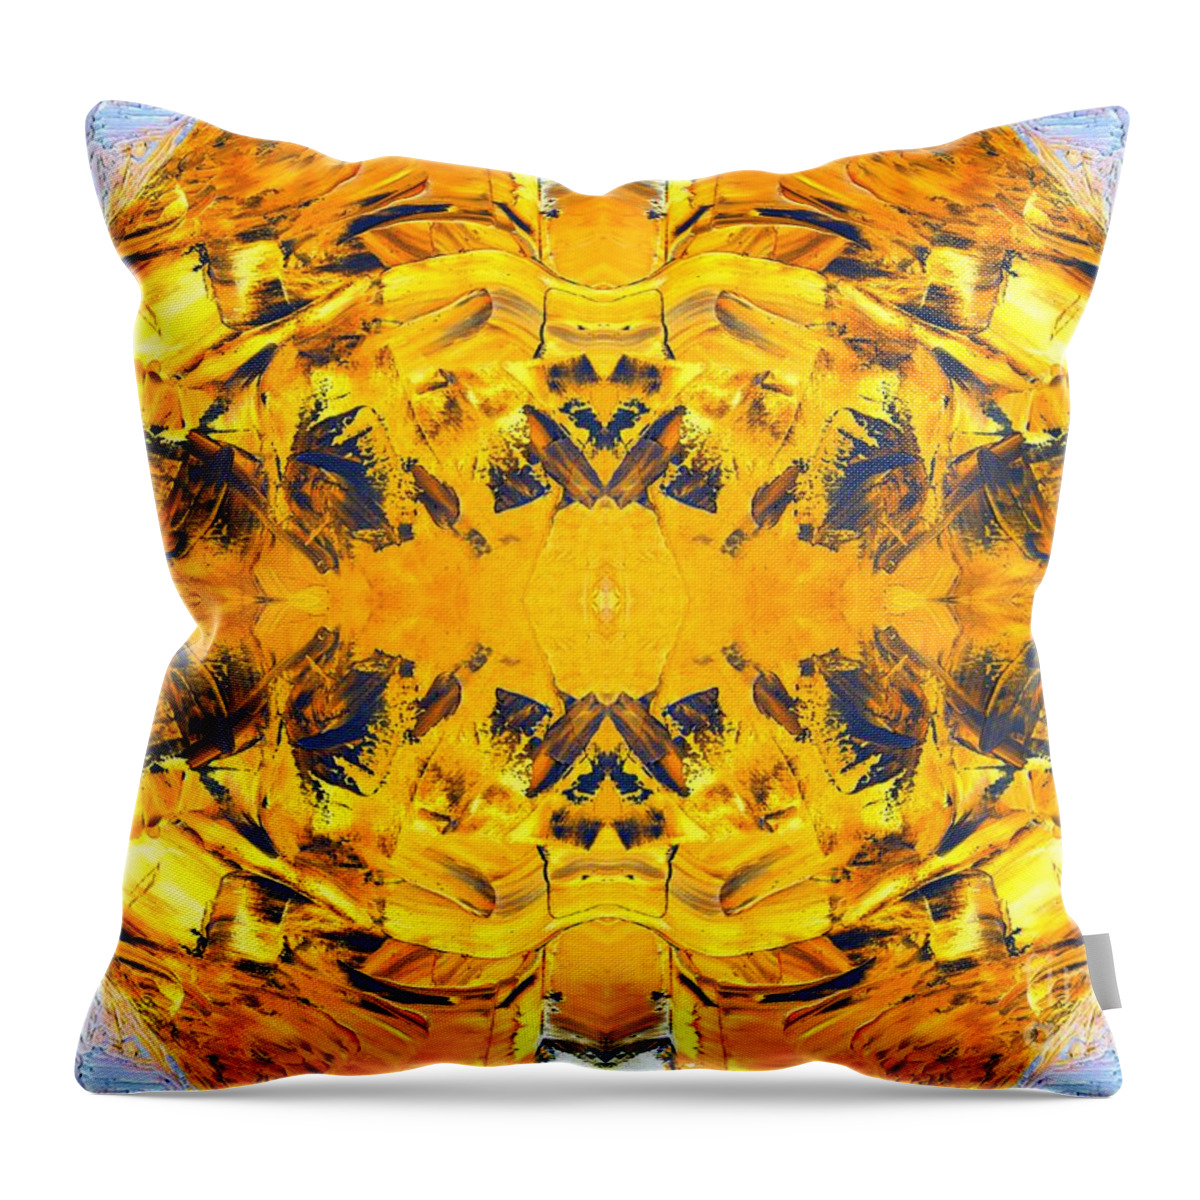 Volcano Throw Pillow featuring the painting Into The Volcano by Bill King